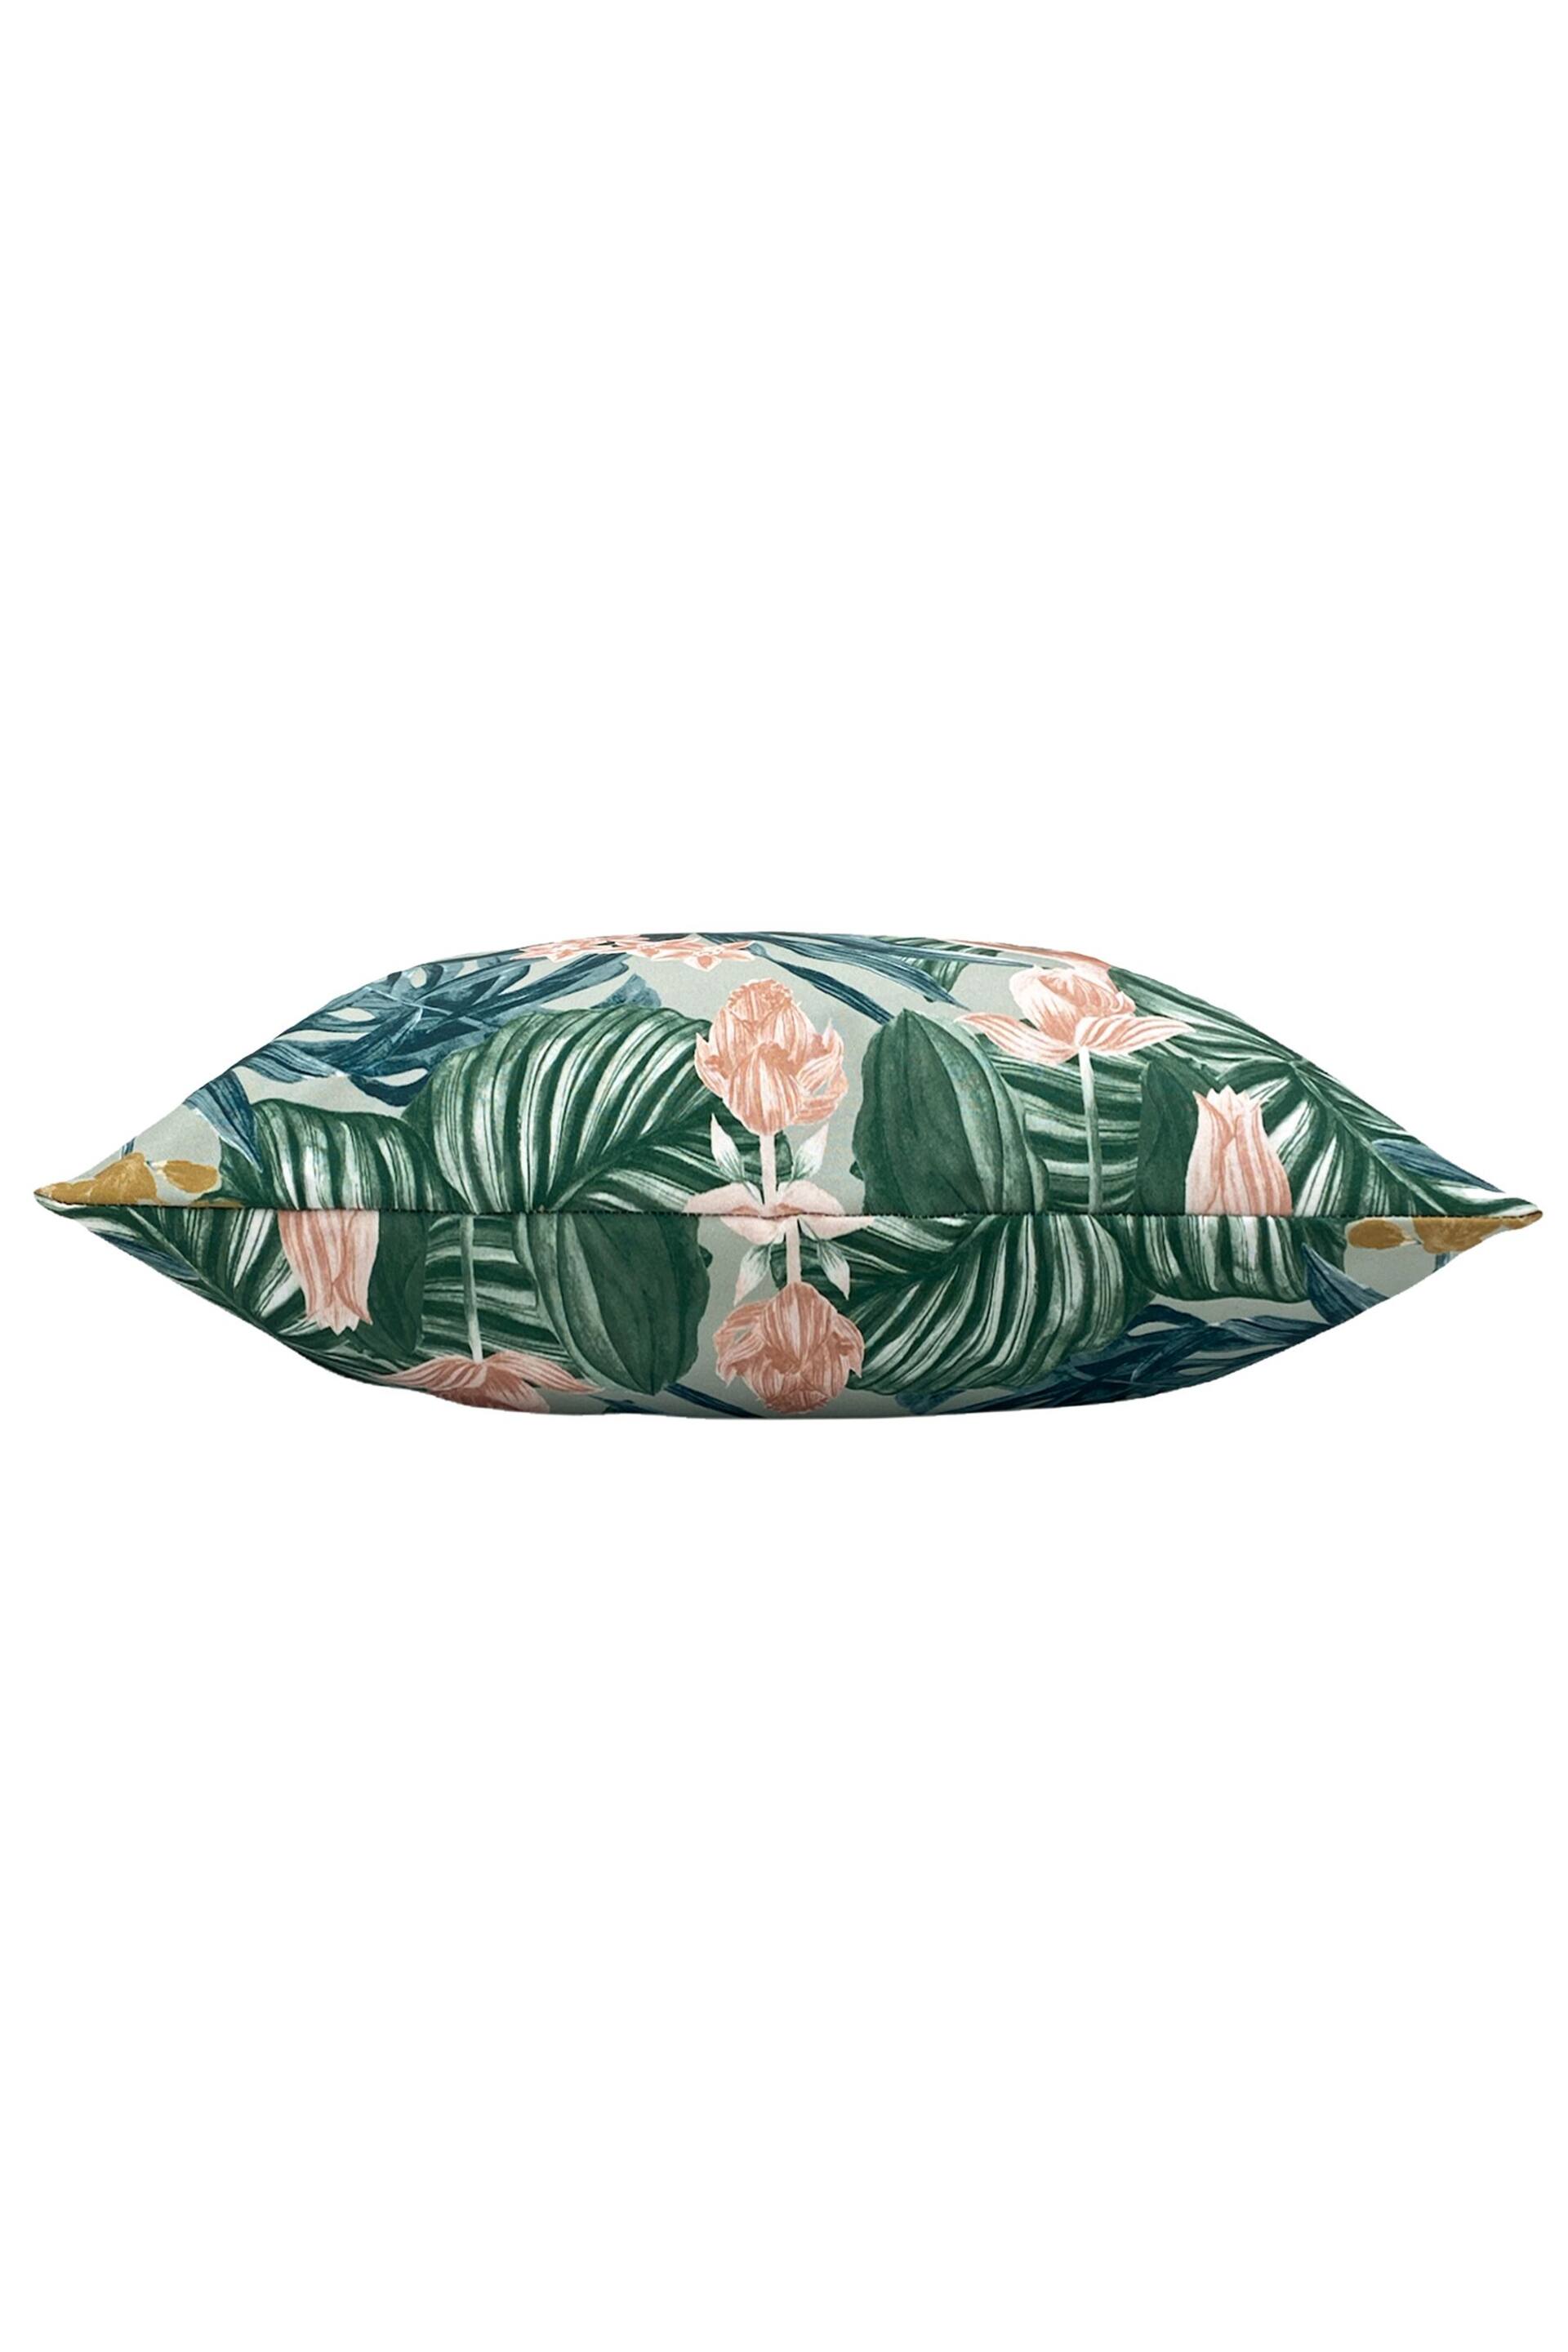 Furn Sage Green Medinilla Water Resistant Outdoor Cushion - Image 4 of 5